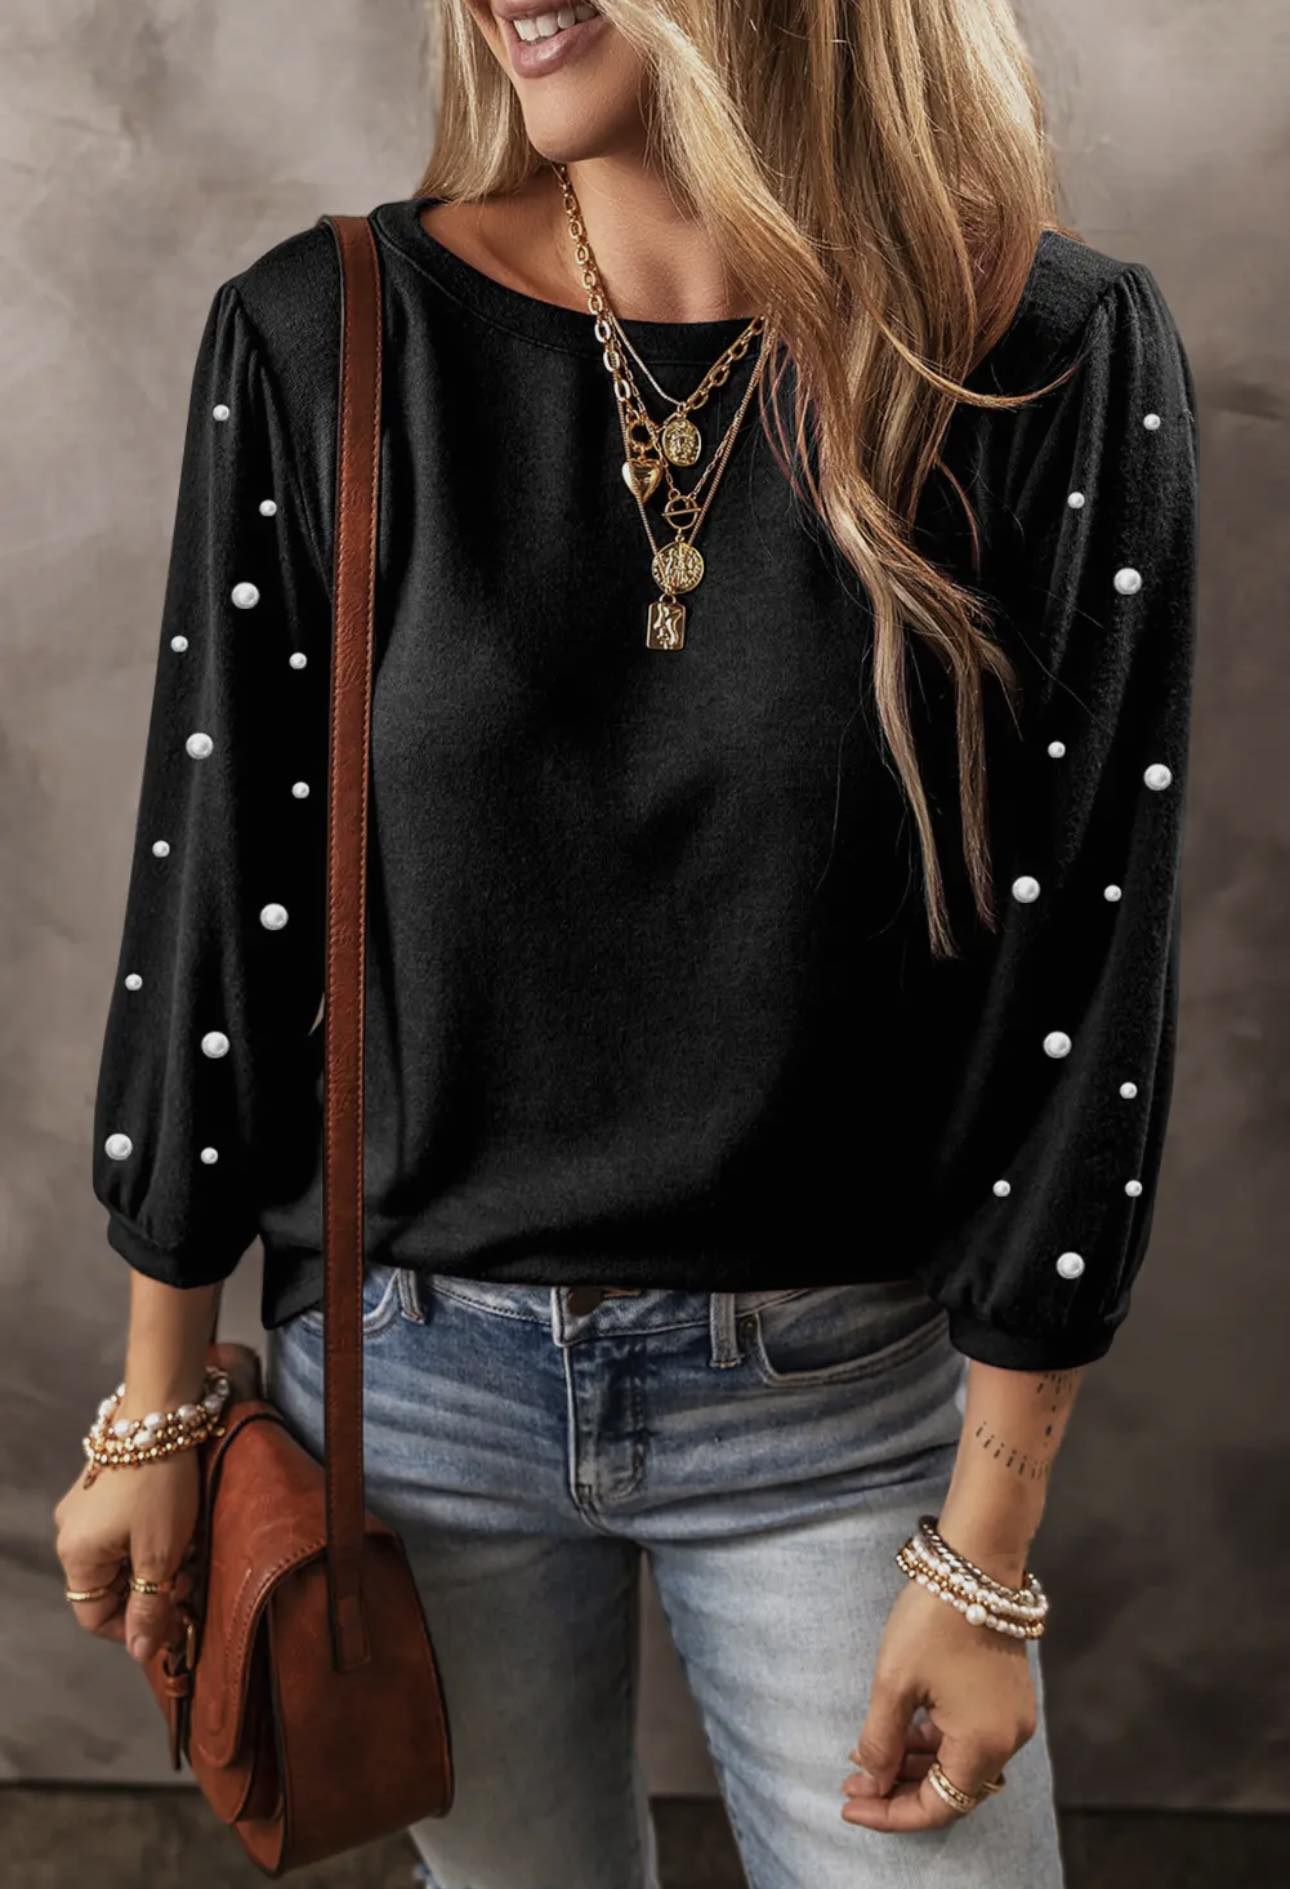 Black Sweater With Pearls On 3/4 Sleeves